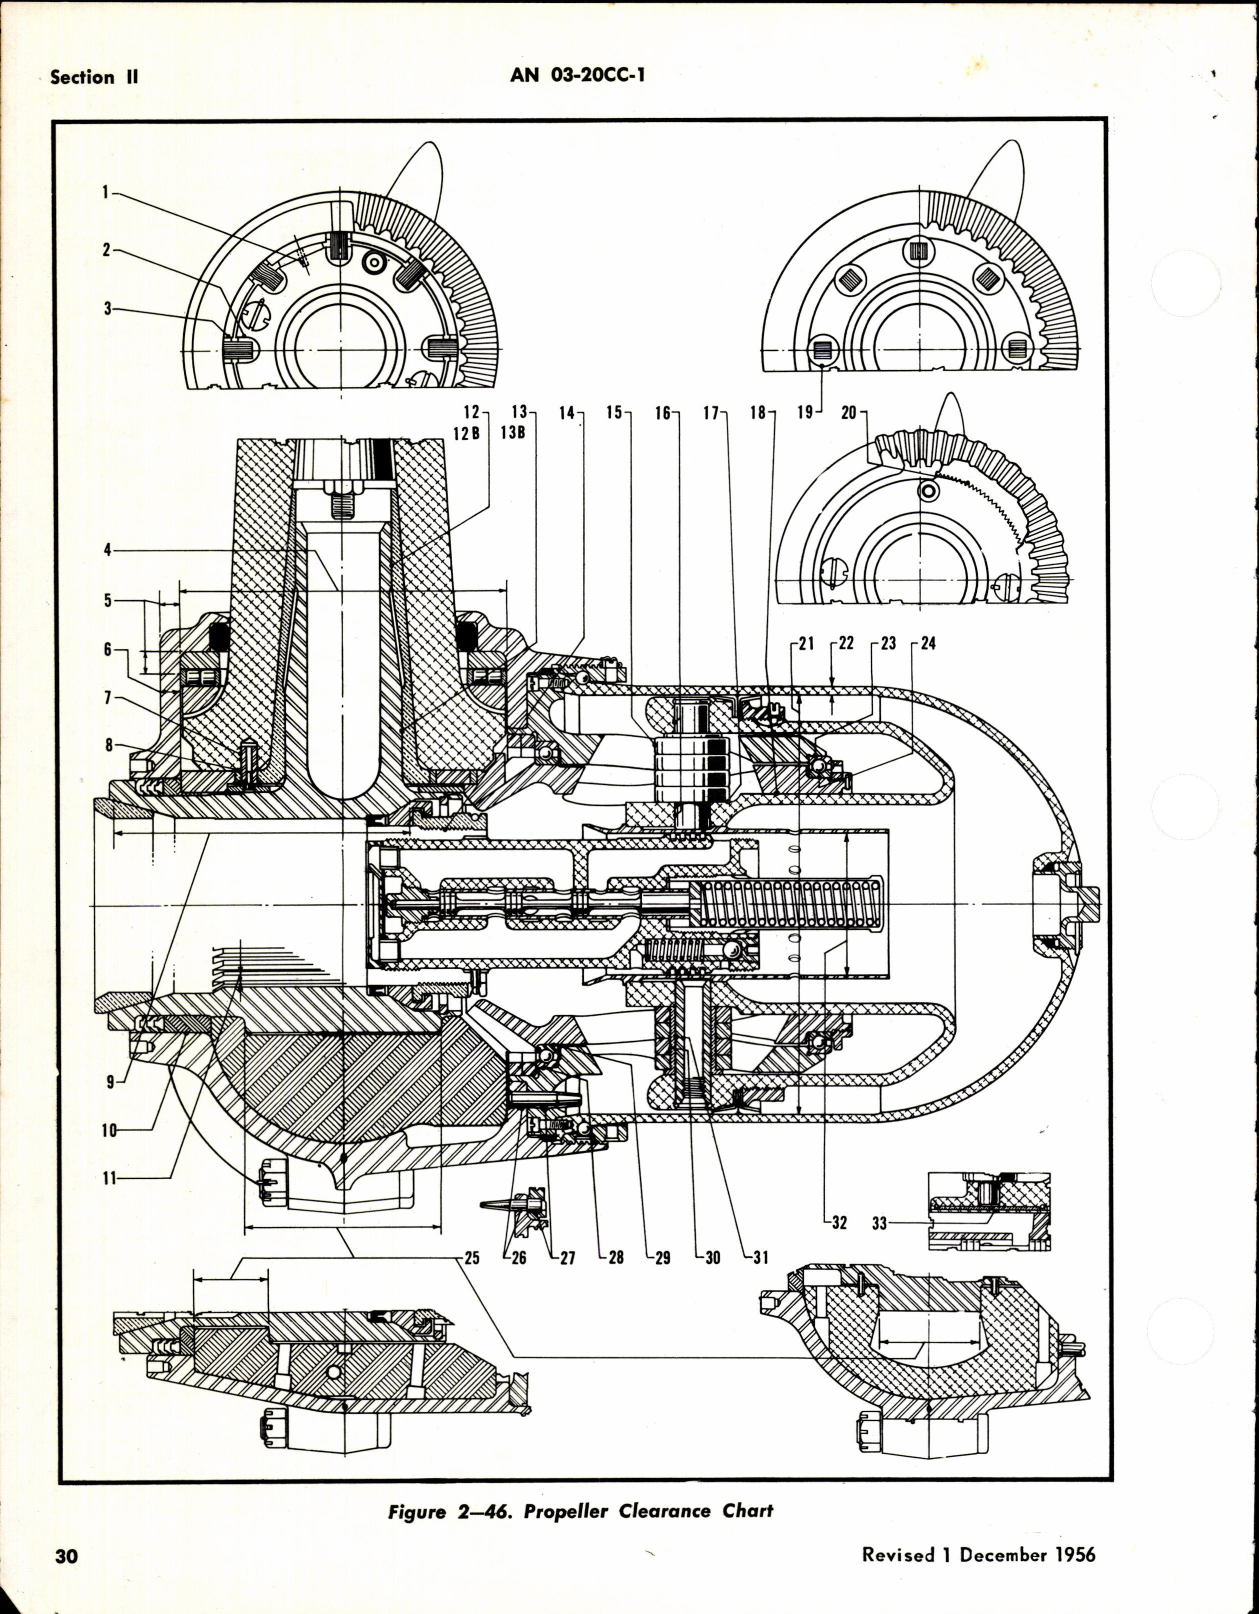 Sample page 4 from AirCorps Library document: Handbook Overhaul Instructions for Hydromatic Propellers